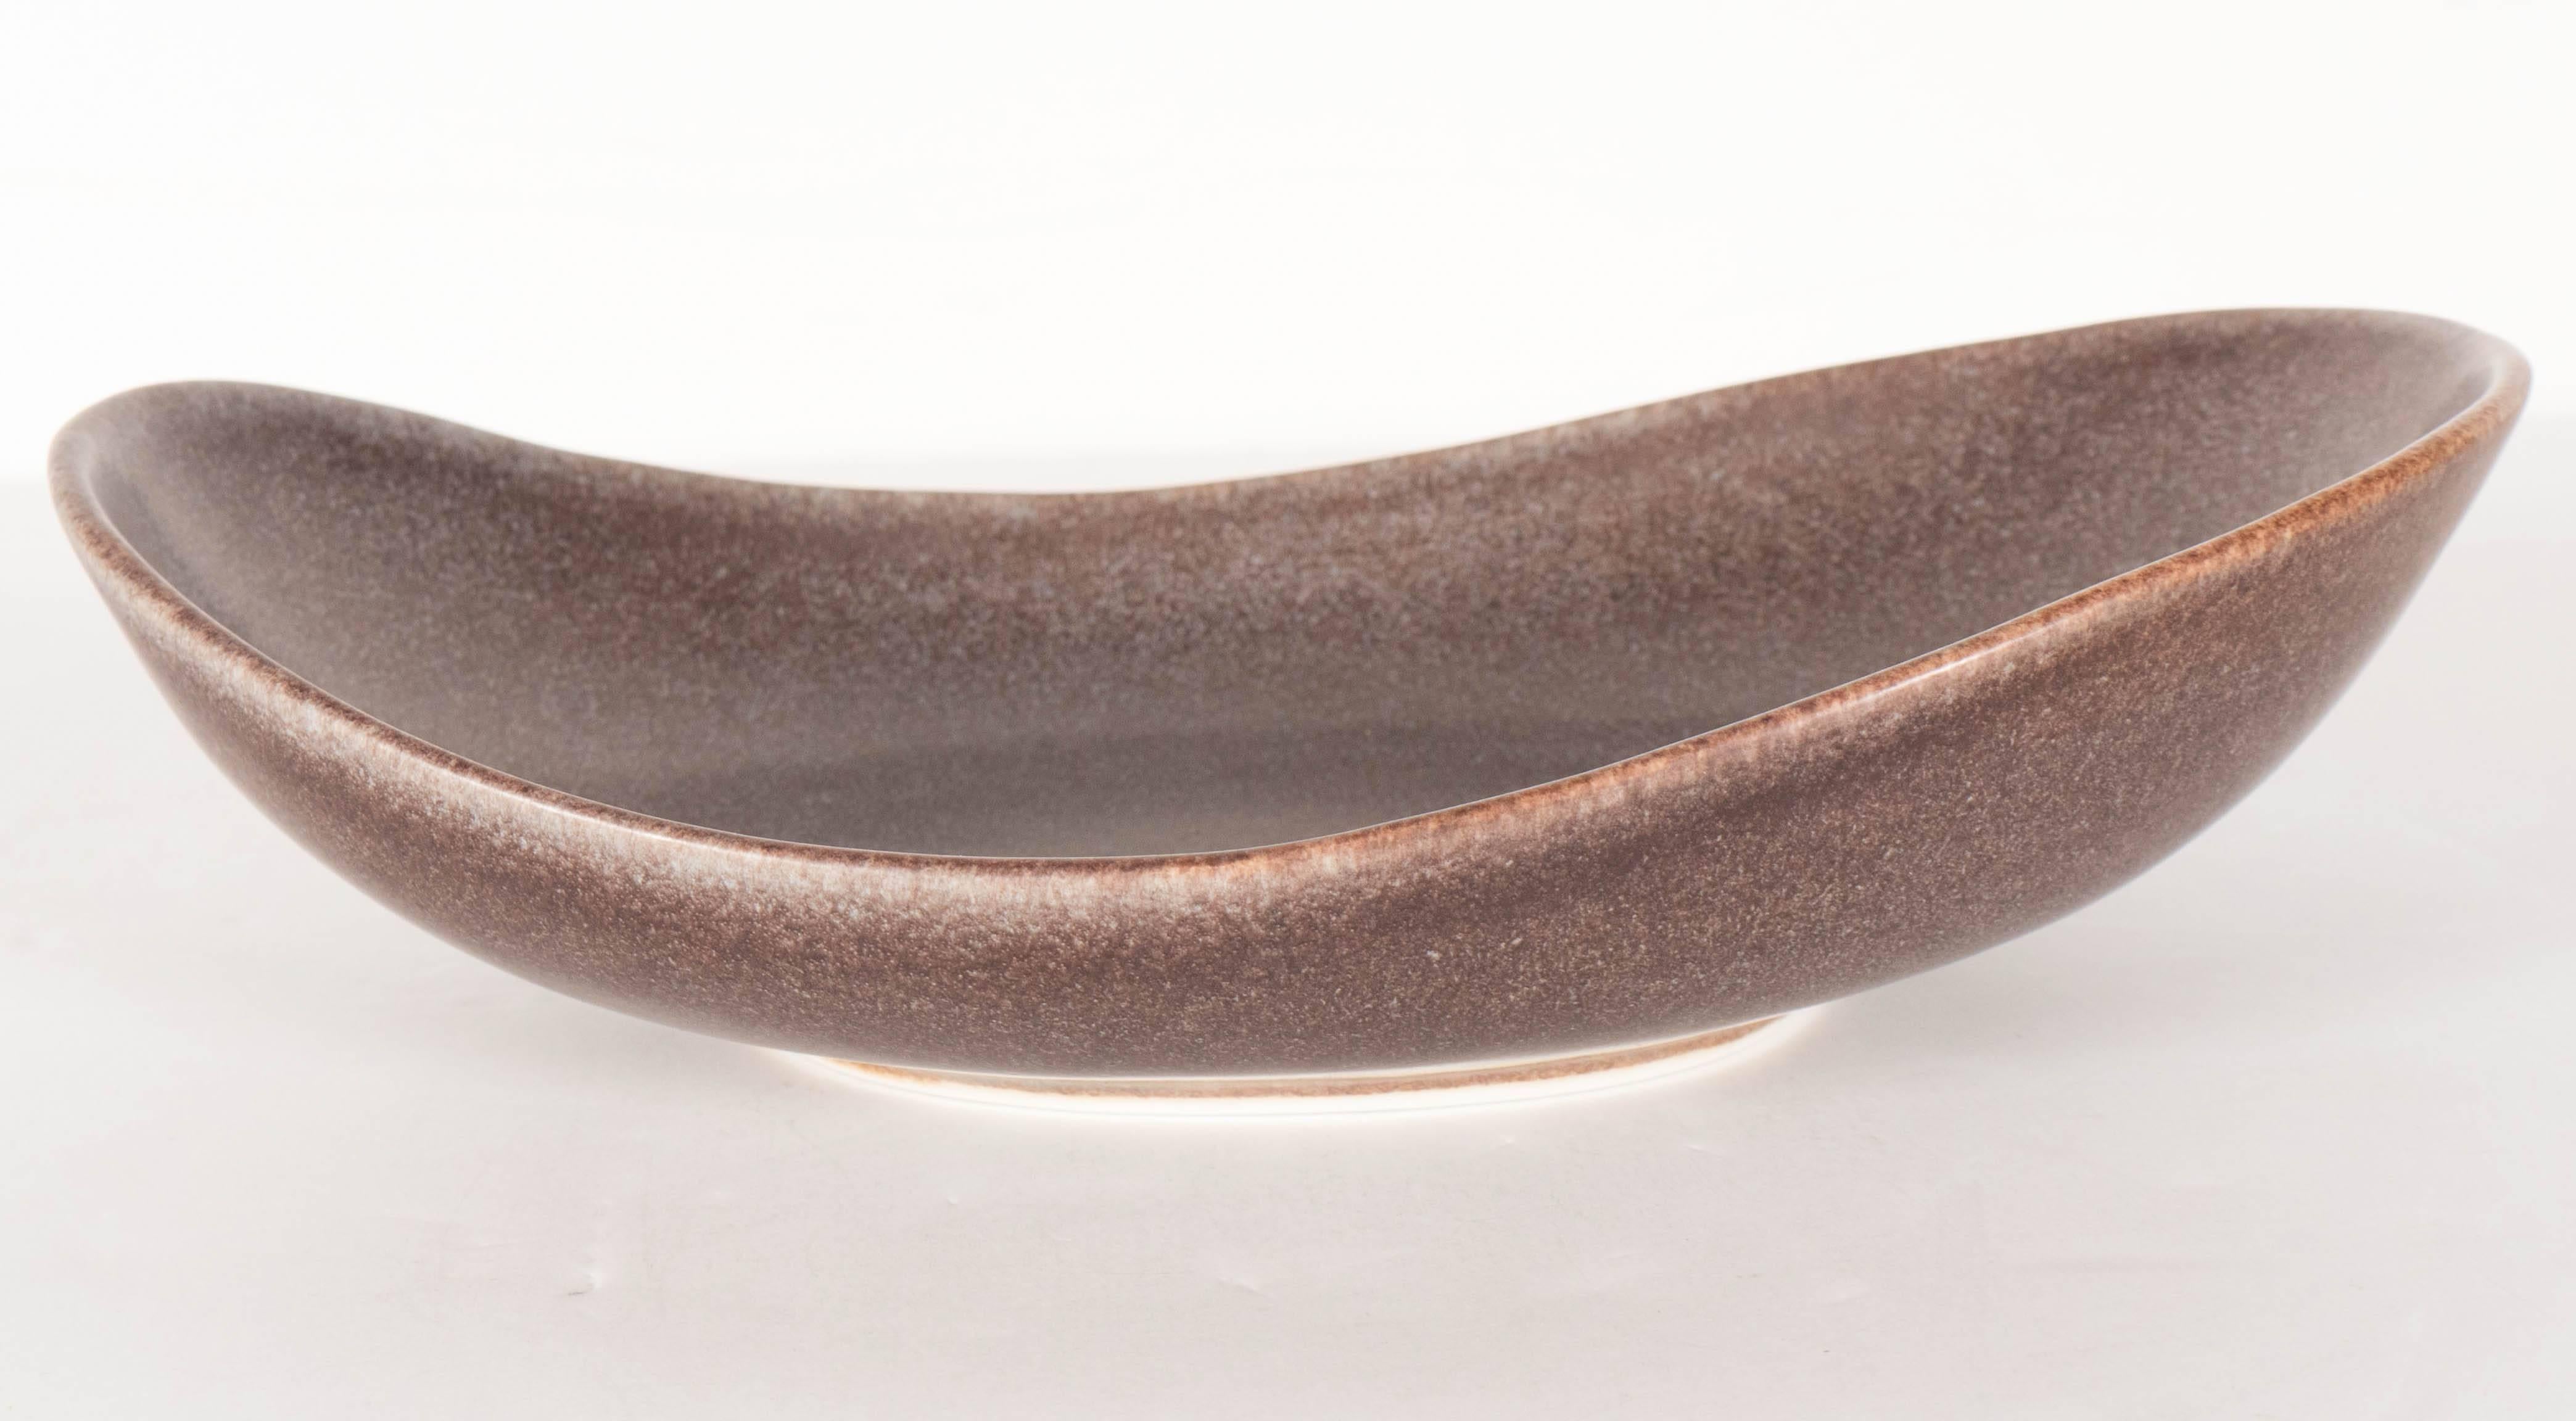 Striking Mid-Century Modernist ovoid bowl by Carl-Harry Stålhane for Rörstrand. A mix of tobacco, grey and burnt terra cotta covers the speckled finish of this piece. Signed on its bottom. This piece is in excellent condition. An incredible